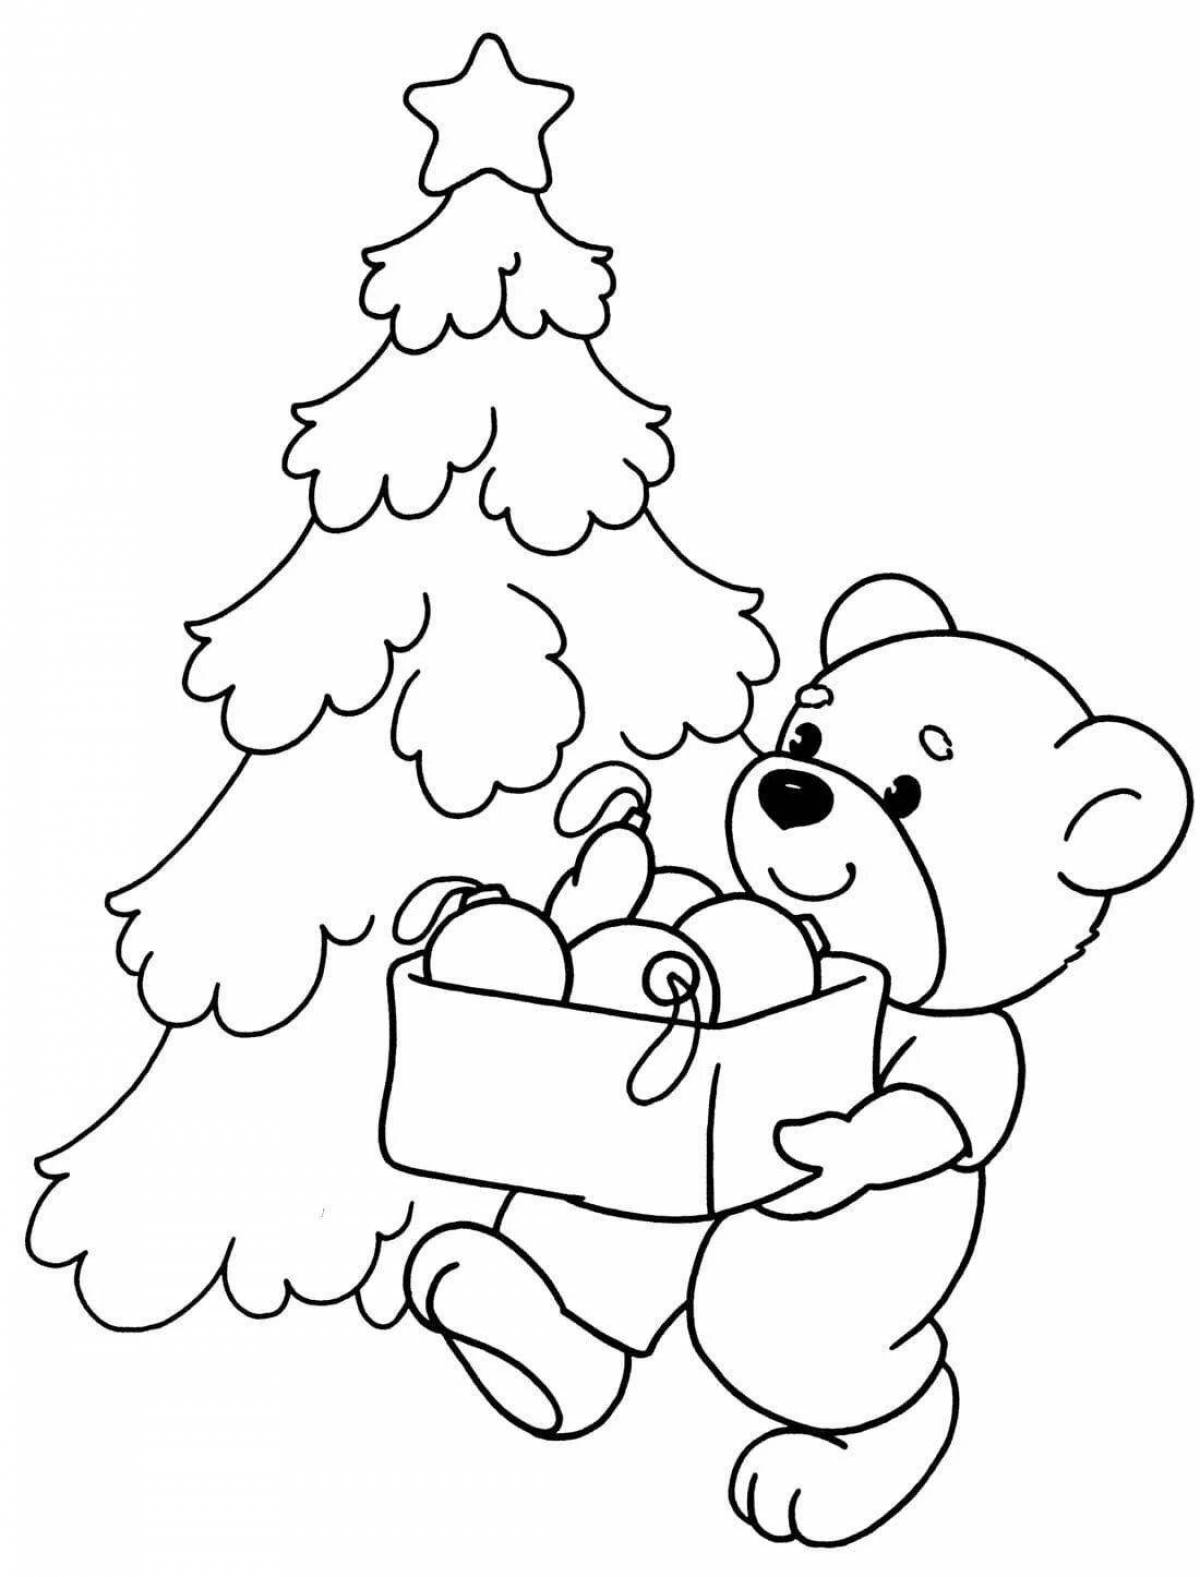 Cute Christmas animal coloring pages